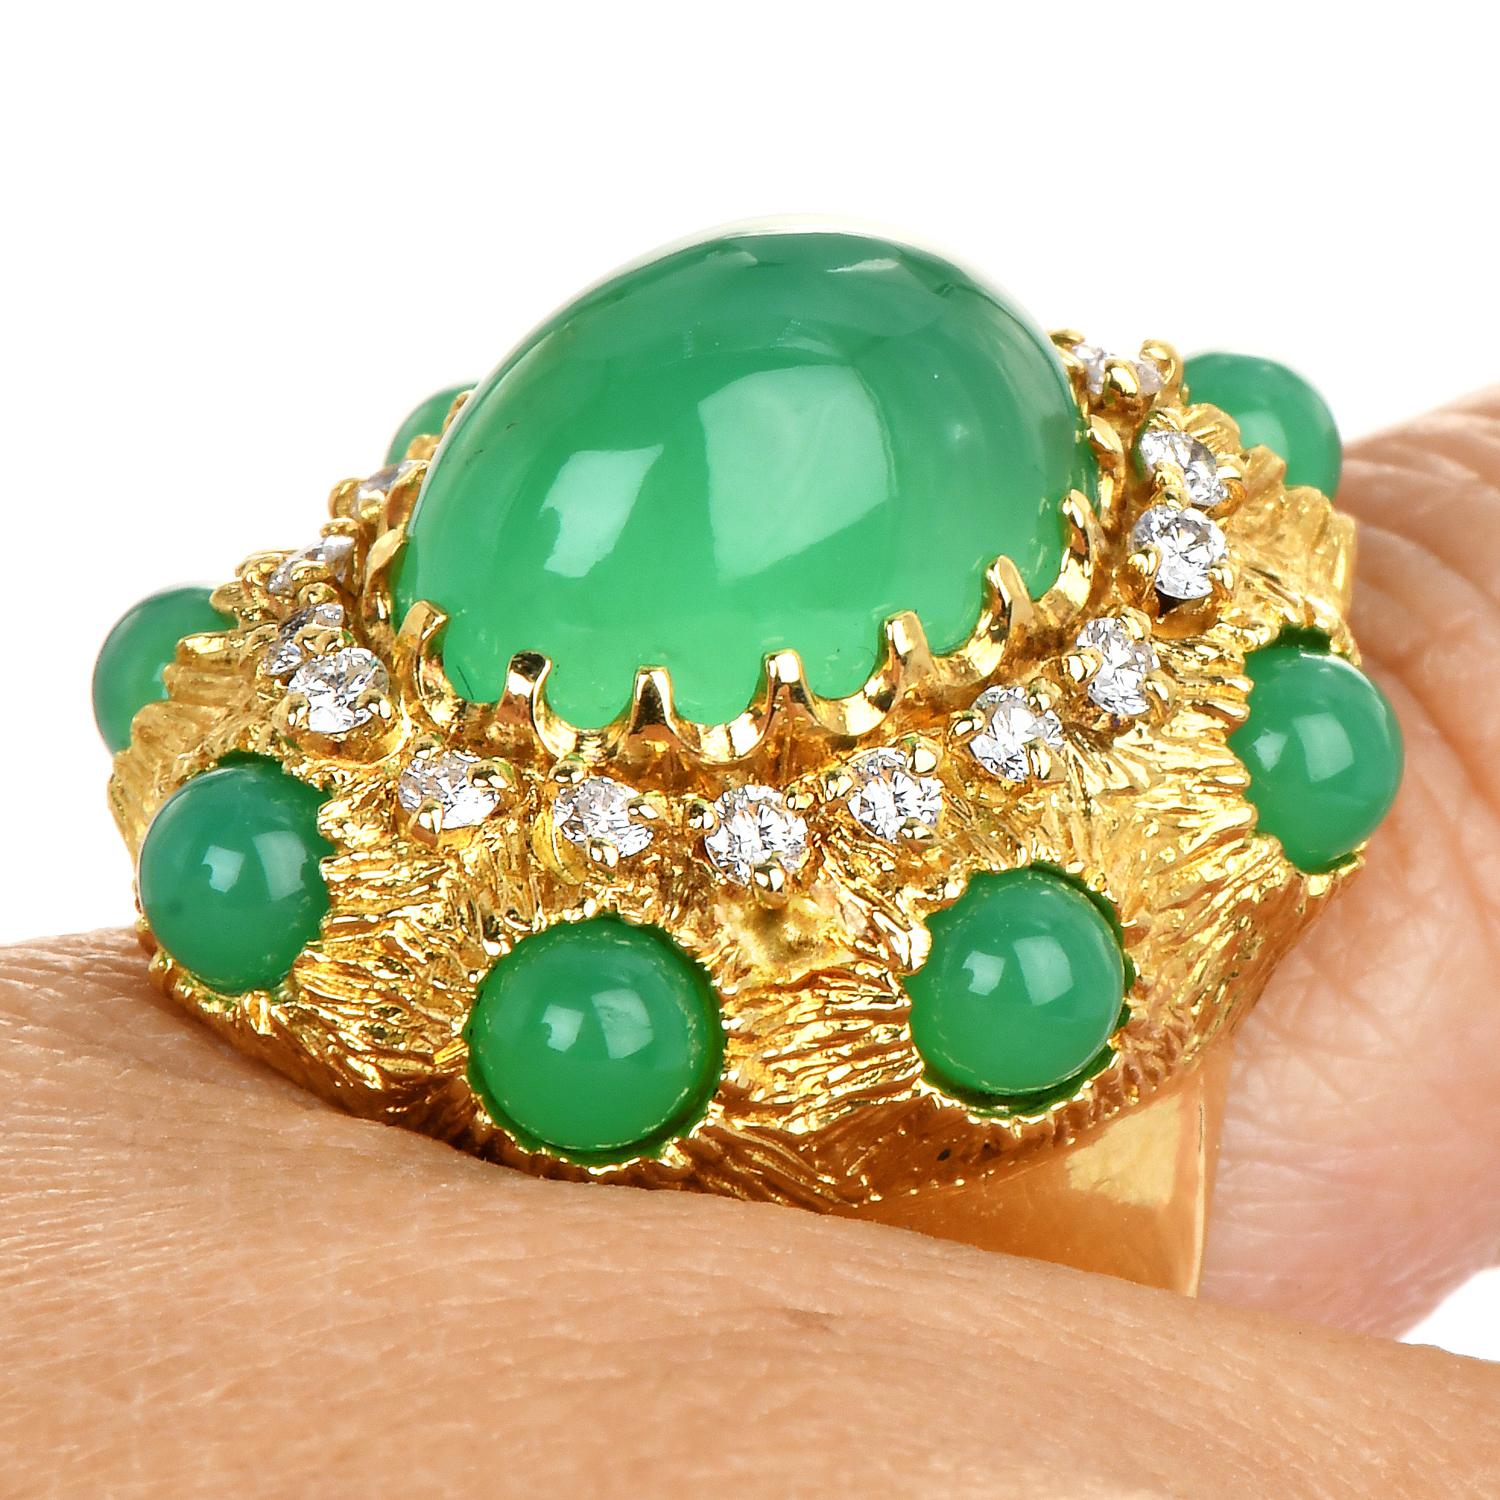 An outstanding luxurious cocktail ring with hand-carved accents. 

Crafted in solid 18K Yellow Gold

Centered by a cabochon Green Chalcedony, Oval cut, prong set, measuring 13 mm x 10 mm, weighing  4.70 carats

Sided with (8) cabochon Green